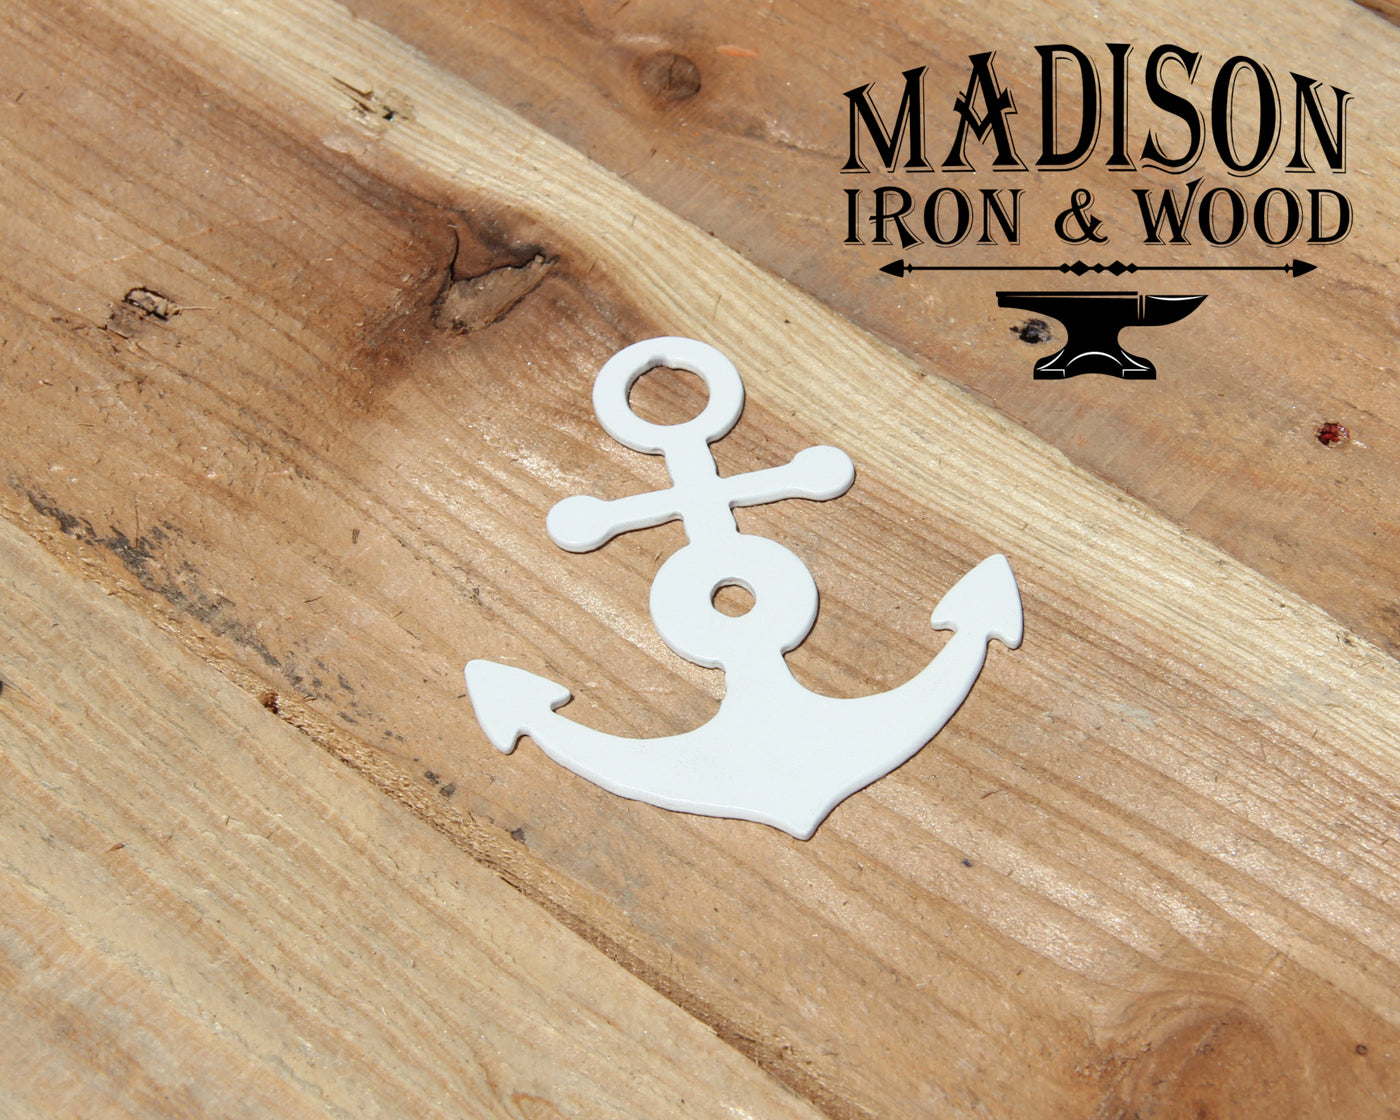 Anchor Cabinet Doorknob Decoration - Madison Iron and Wood - Door Handle Decoration - metal outdoor decor - Steel deocrations - american made products - veteran owned business products - fencing decorations - fencing supplies - custom wall decorations - personalized wall signs - steel - decorative post caps - steel post caps - metal post caps - brackets - structural brackets - home improvement - easter - easter decorations - easter gift - easter yard decor